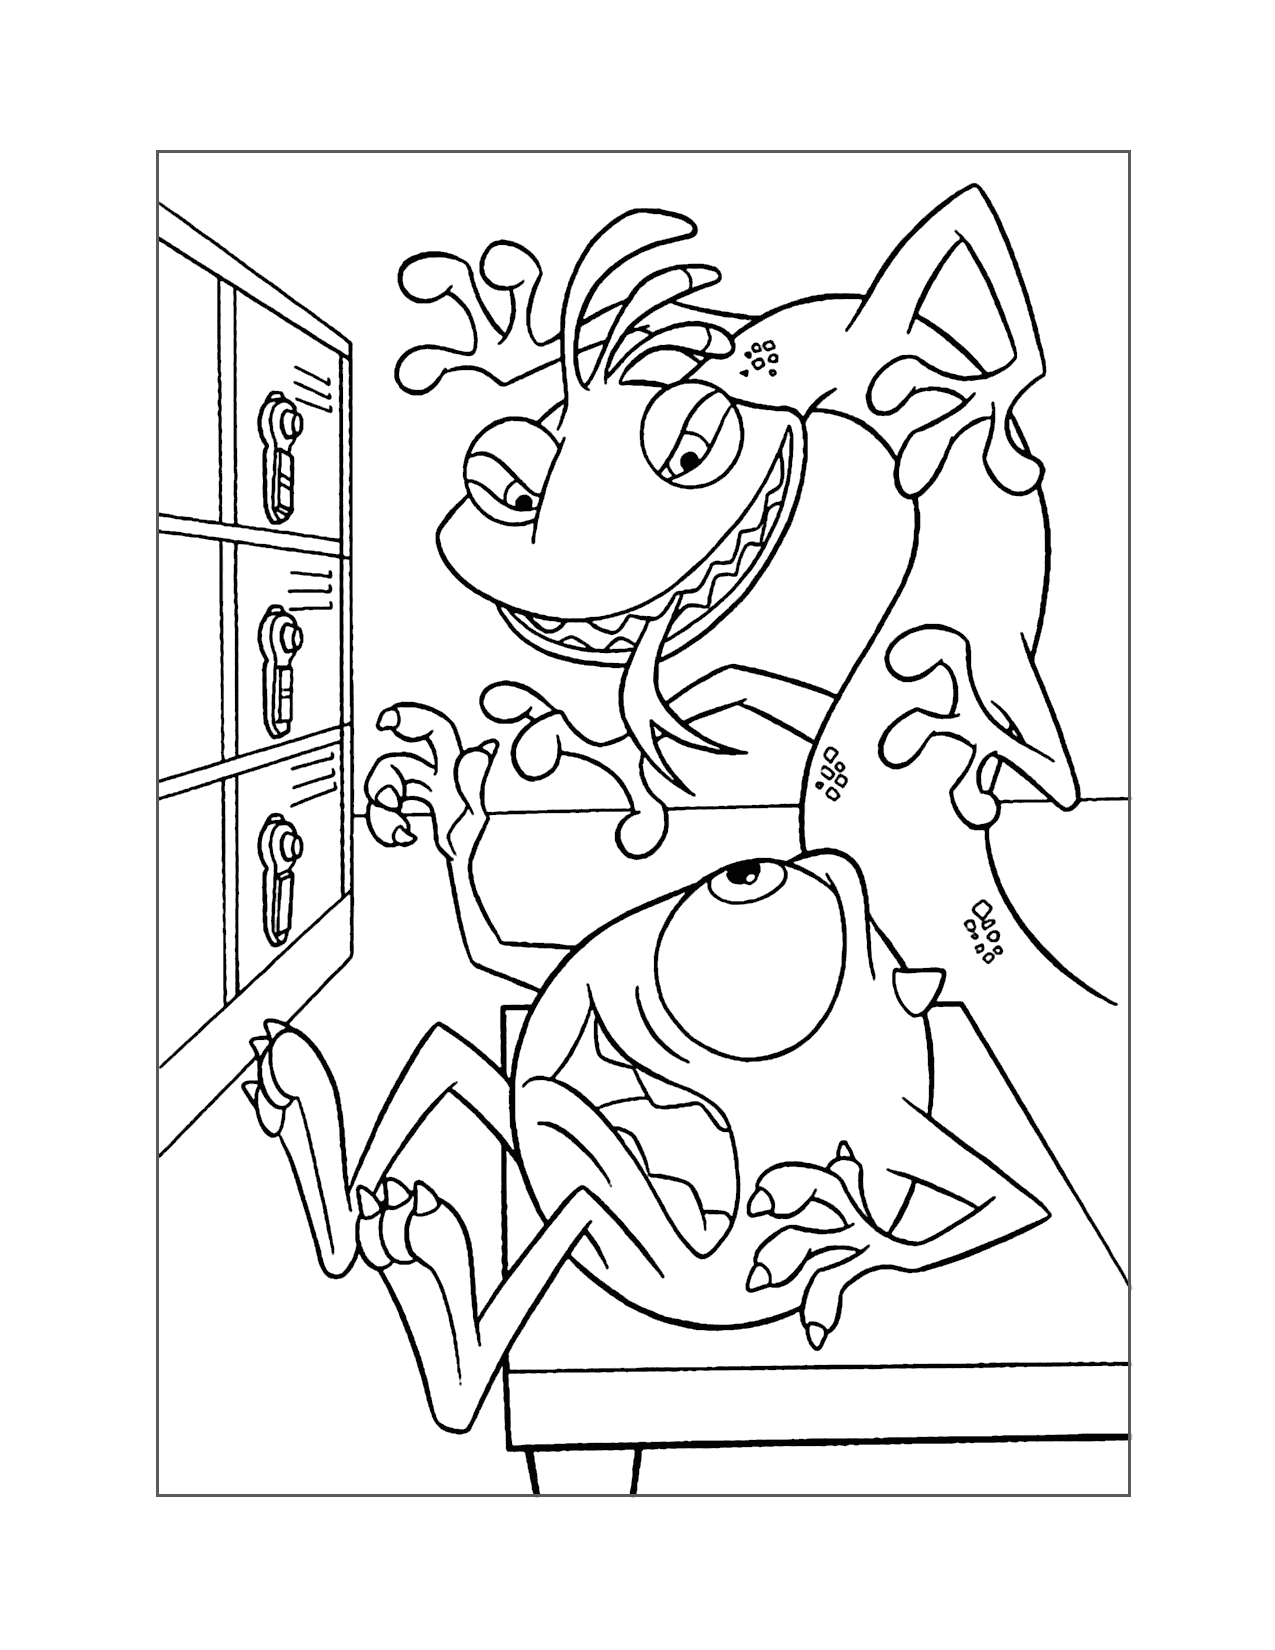 Randall Chases Mike Monsters Inc Coloring Page